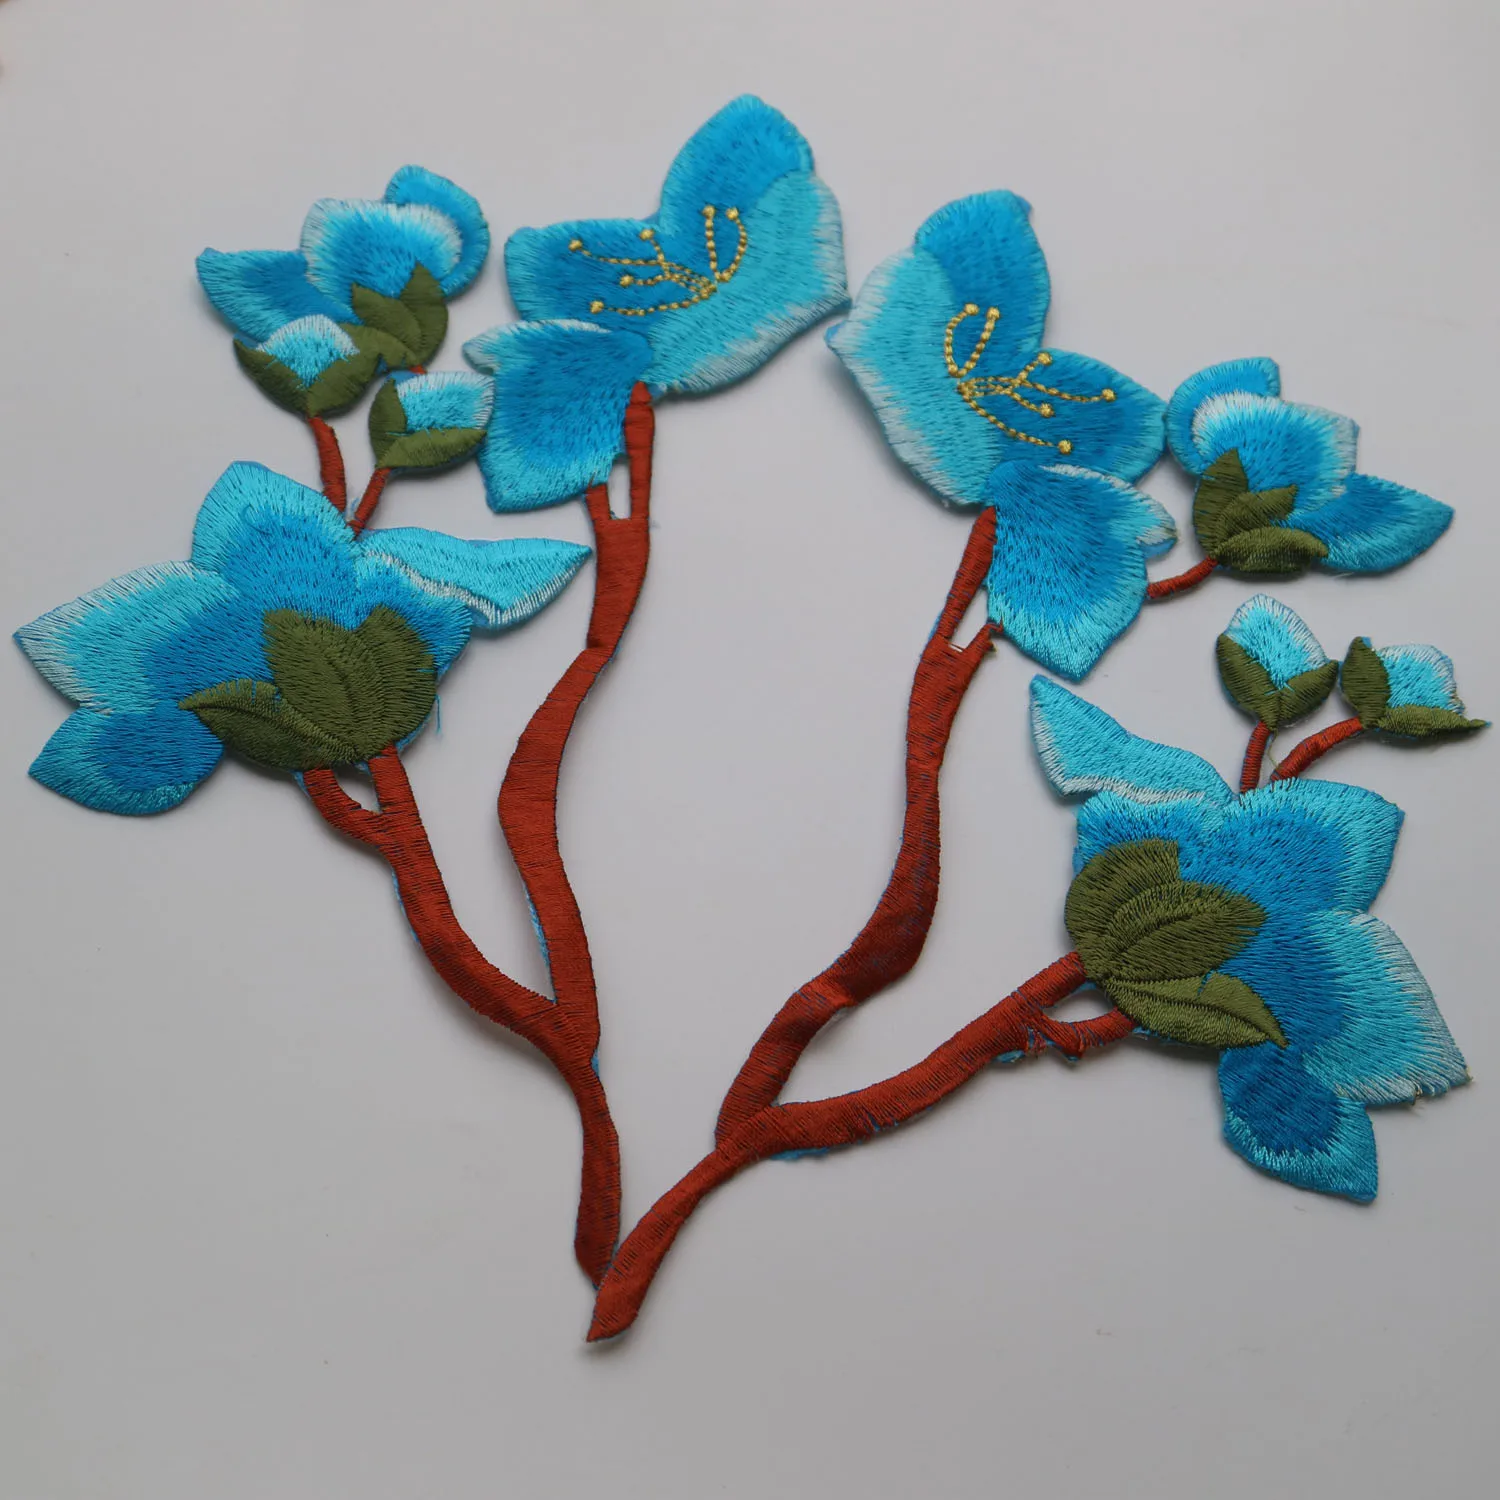 Buy AHYONNIEX 8 Colors Small Embroidery Flower Patches Iron on Applique for  Clothes Accessory Iron Patches for Clothing Online